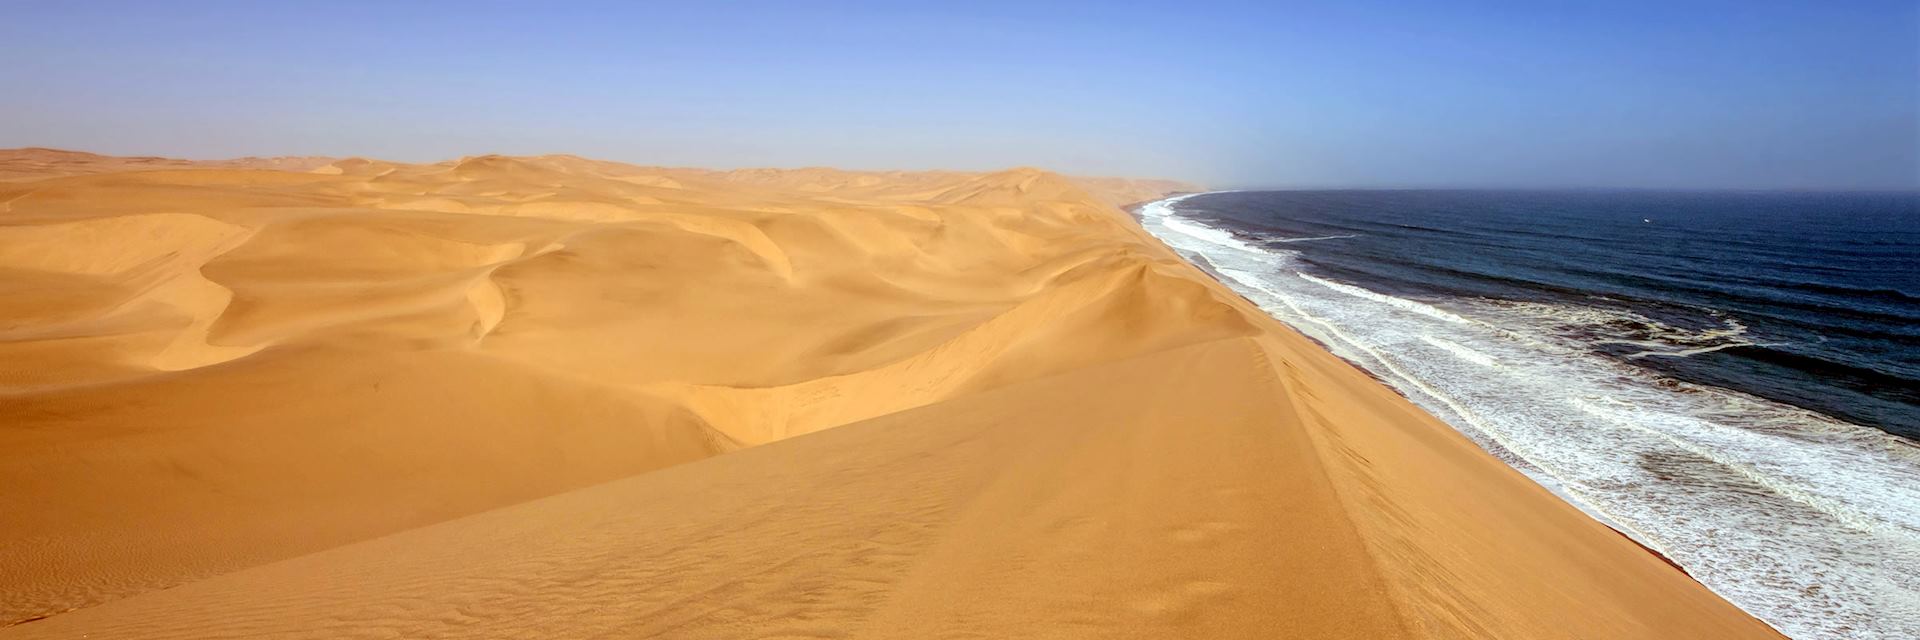 audley travel namibia reviews